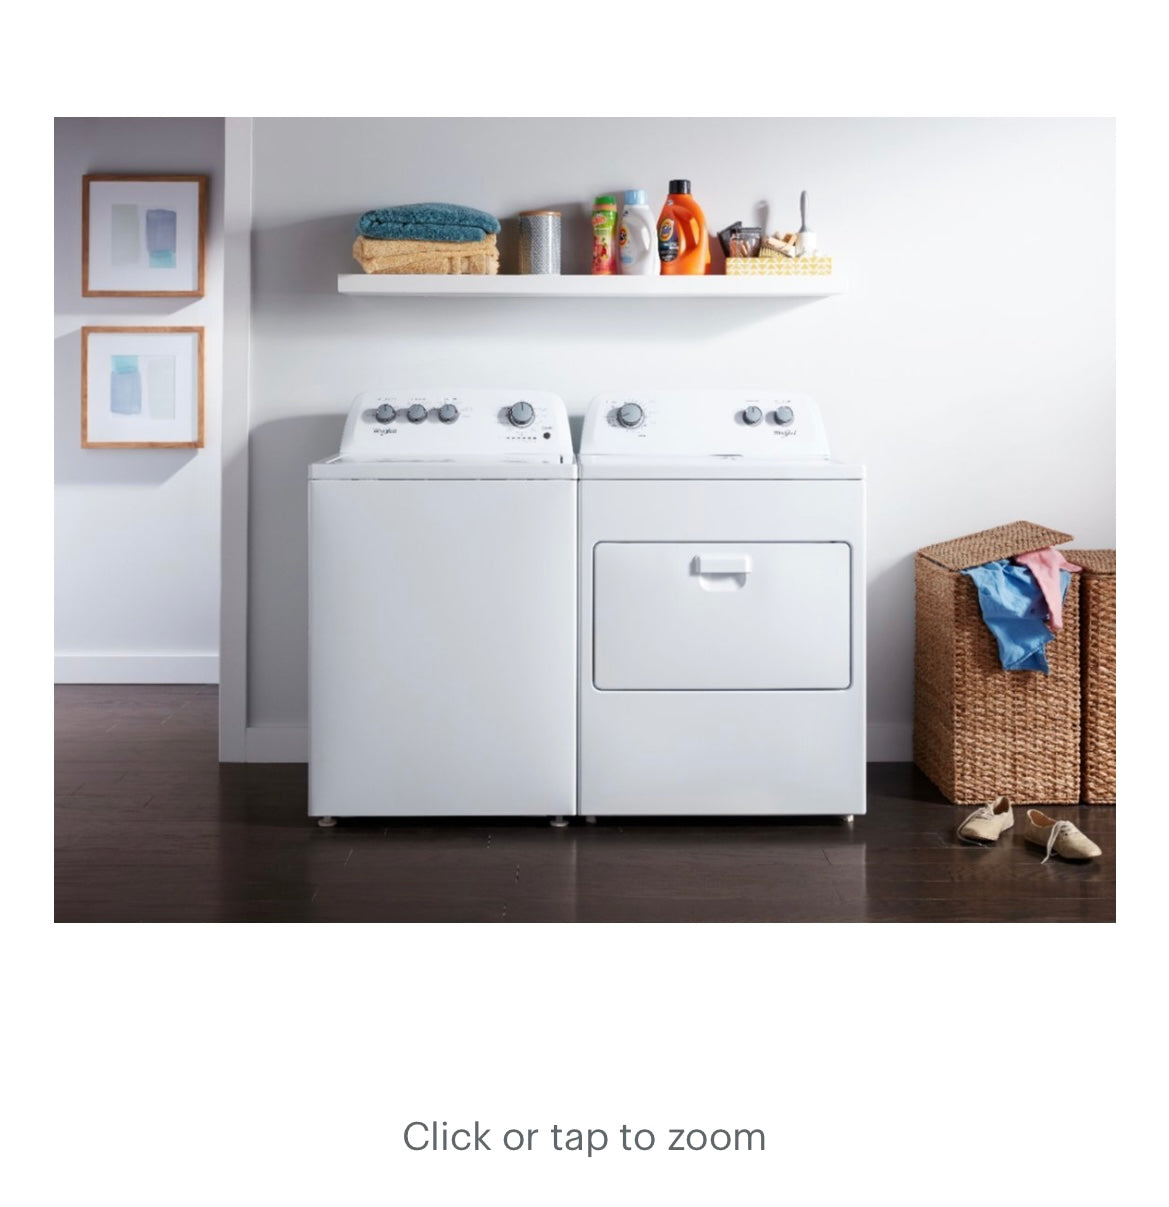 Whirlpool - 3.8 Cu. Ft. 12-Cycle Top-Loading Washer - White